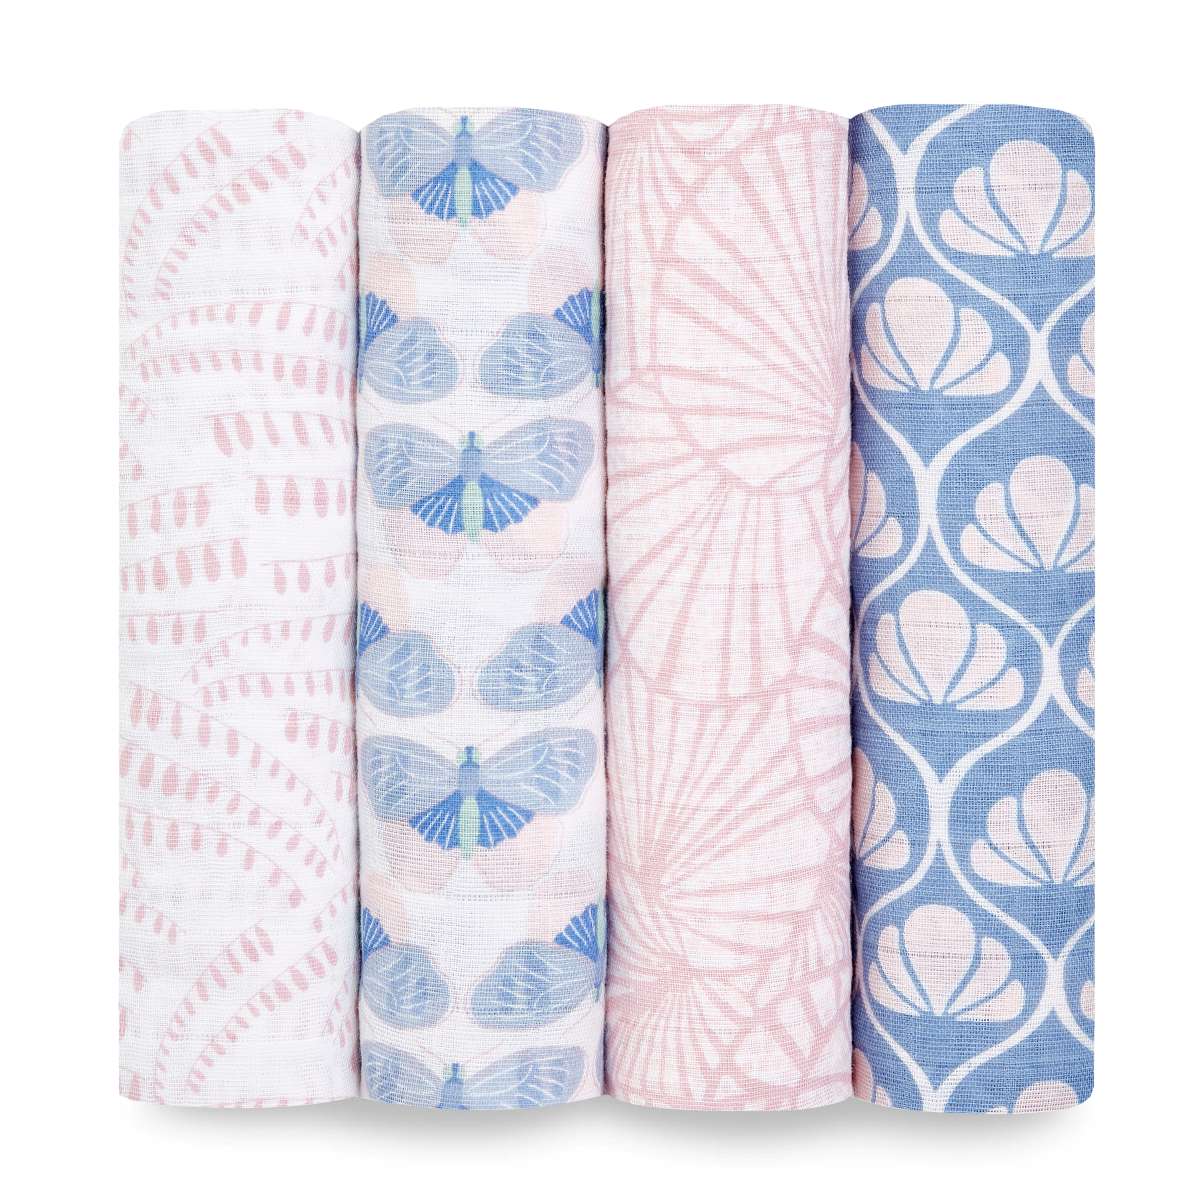 100% cotton muslin aden + anais baby swaddle blankets offer a combination of breathability, versatility, and softness. The fabric is pre-washed, ensuring that it is soft and gentle against a baby's delicate skin right from the start.  Pack of 4. 